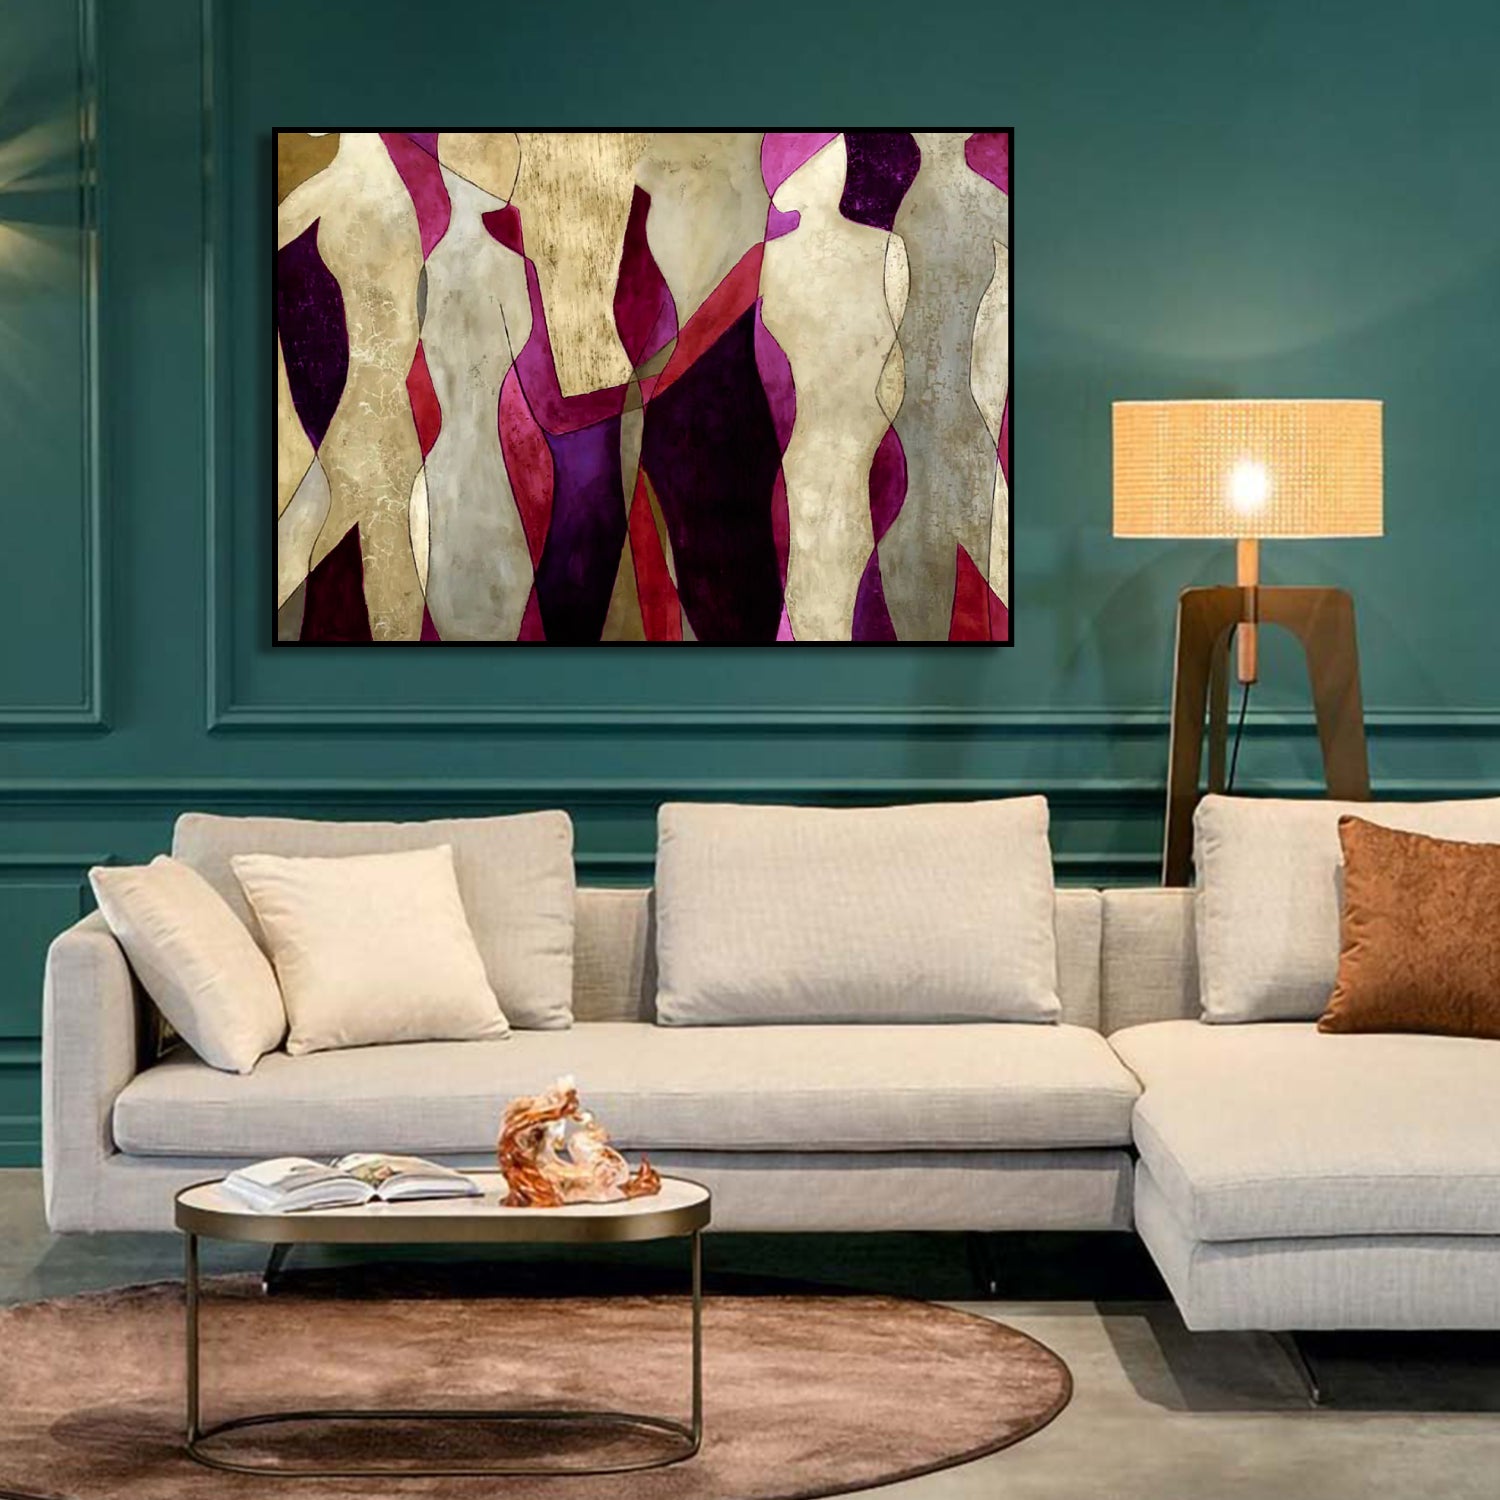 Purple and Golden Figures Abstract Wall Artwork